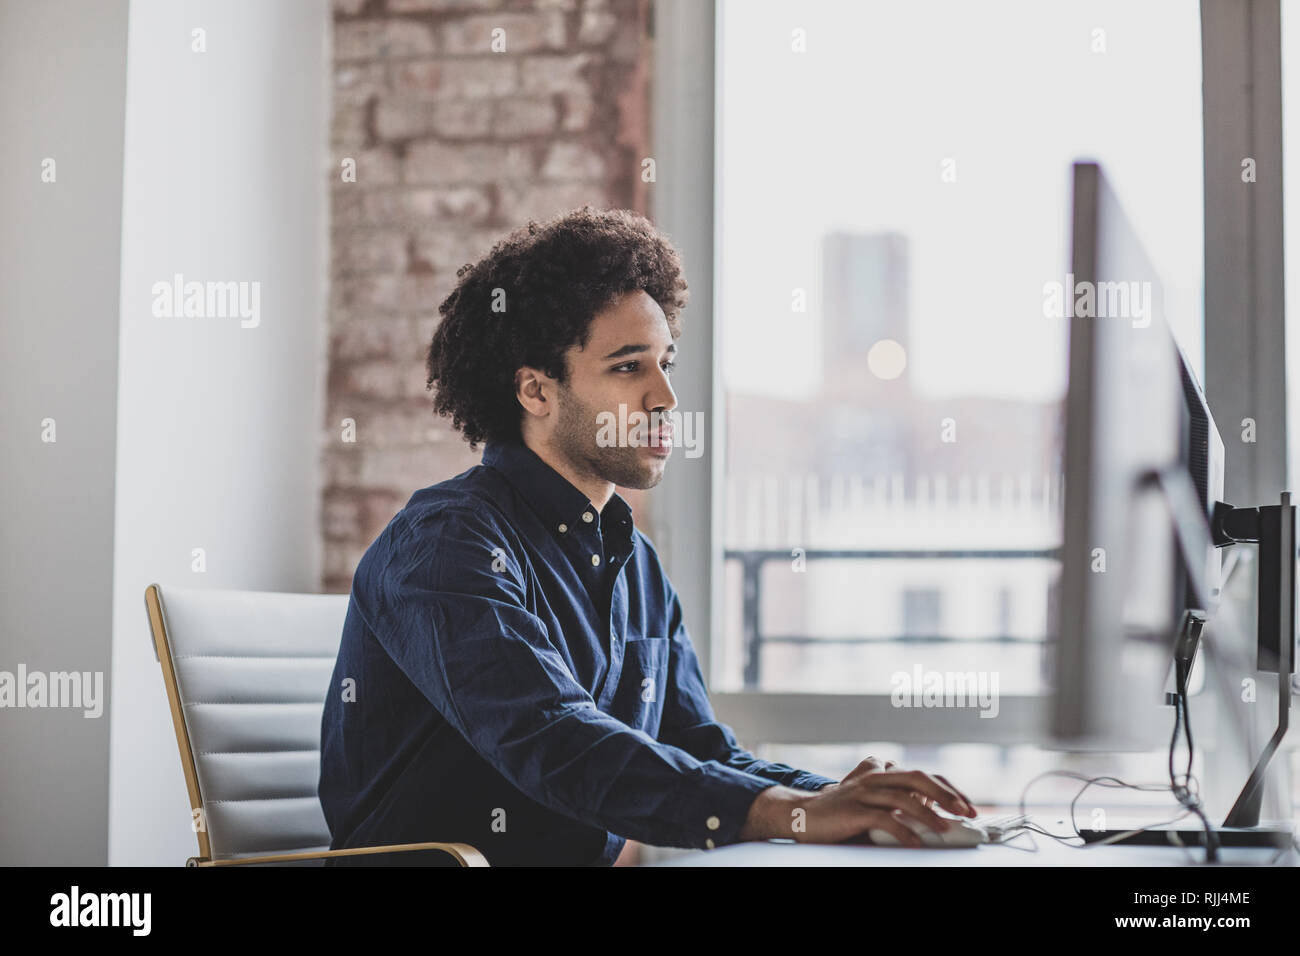 Male african american business executive working in an office on a desktop computer Stock Photo